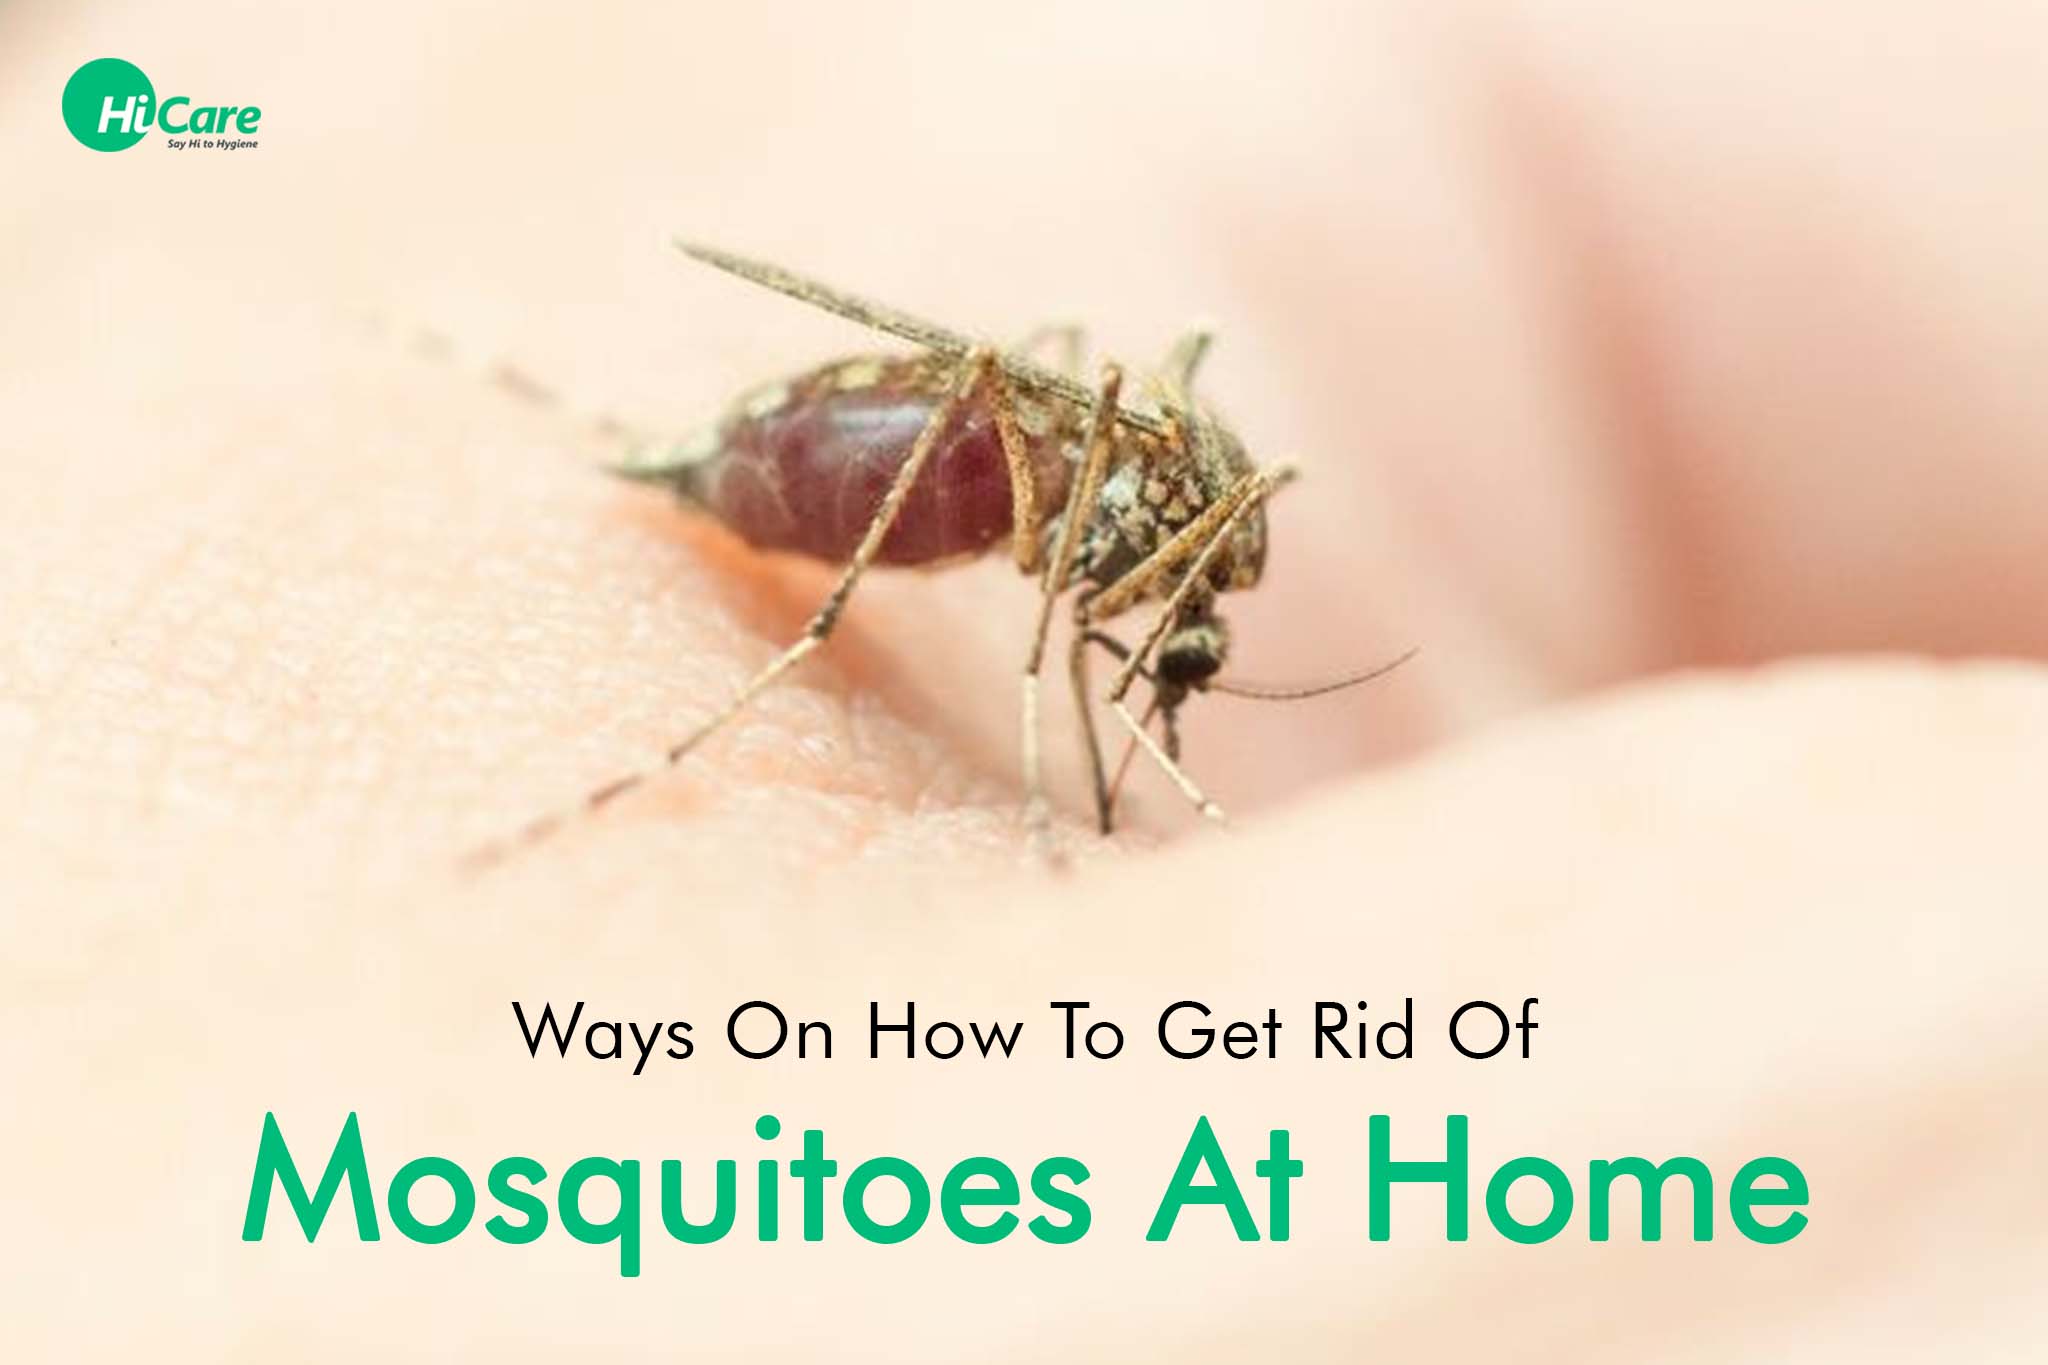 6 ways on how to get rid of mosquitoes at home